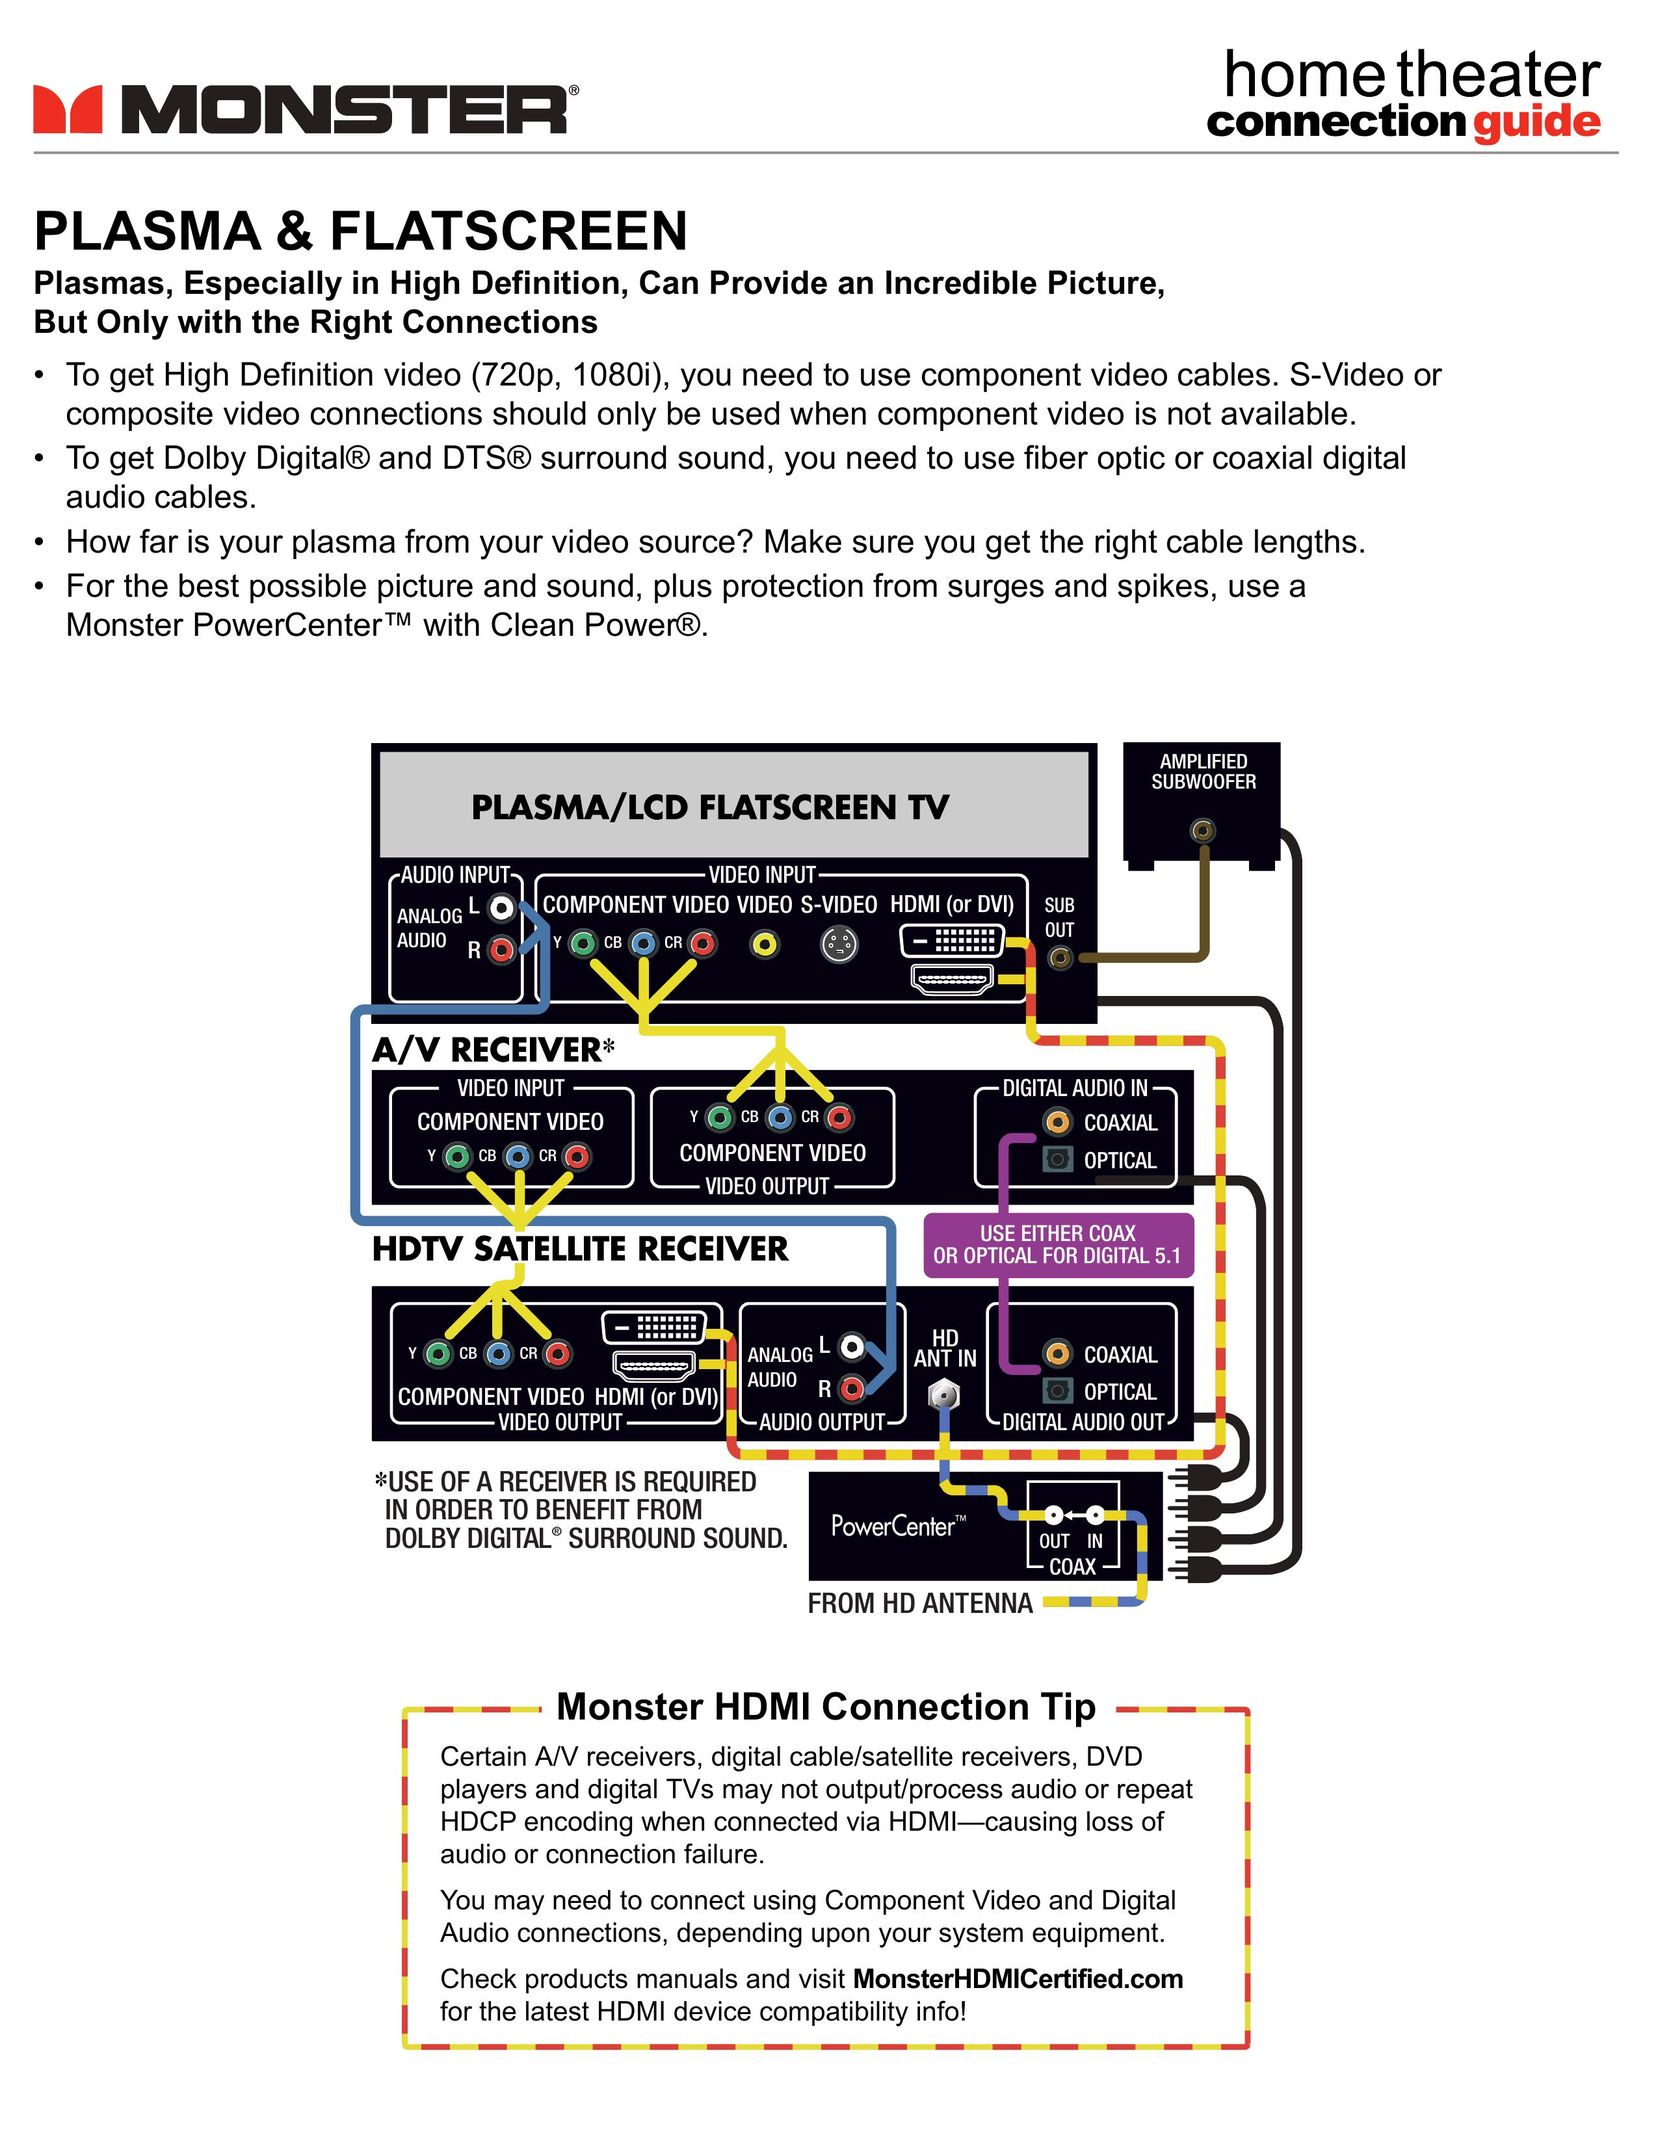 Monster Cable 57LX177 Flat Panel Television User Manual